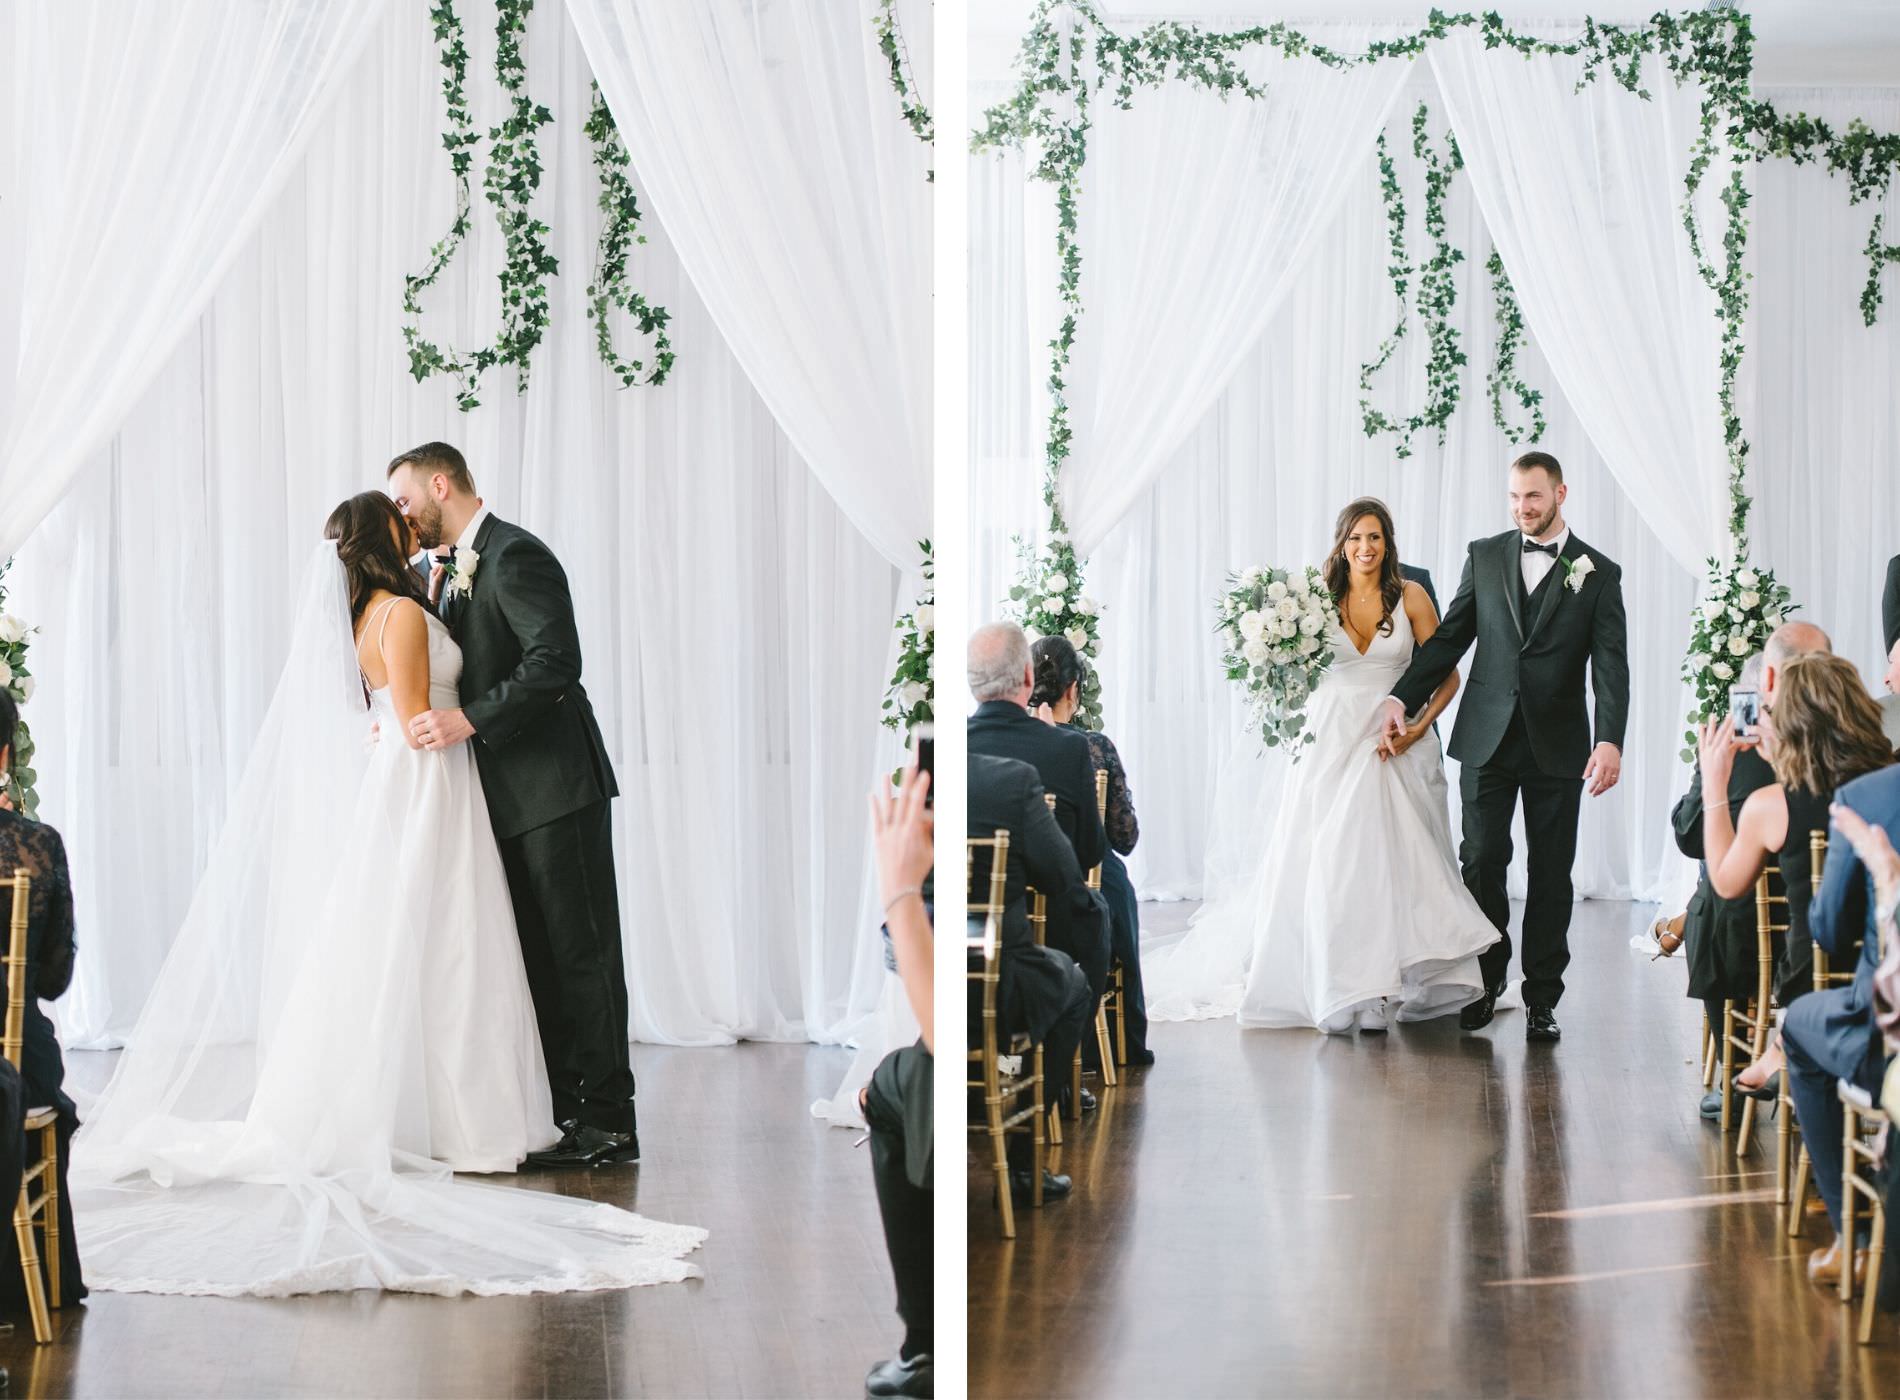 Florida Bride and Groom Exchanging Wedding Vows During Ceremony | White Linen Draping with Lush Greenery Garland and Arrangements | Tampa Bay Wedding Photographer Kera Photography | Tampa Bay Wedding Planner Breezin' Weddings | Historic Wedding Venue The Orlo